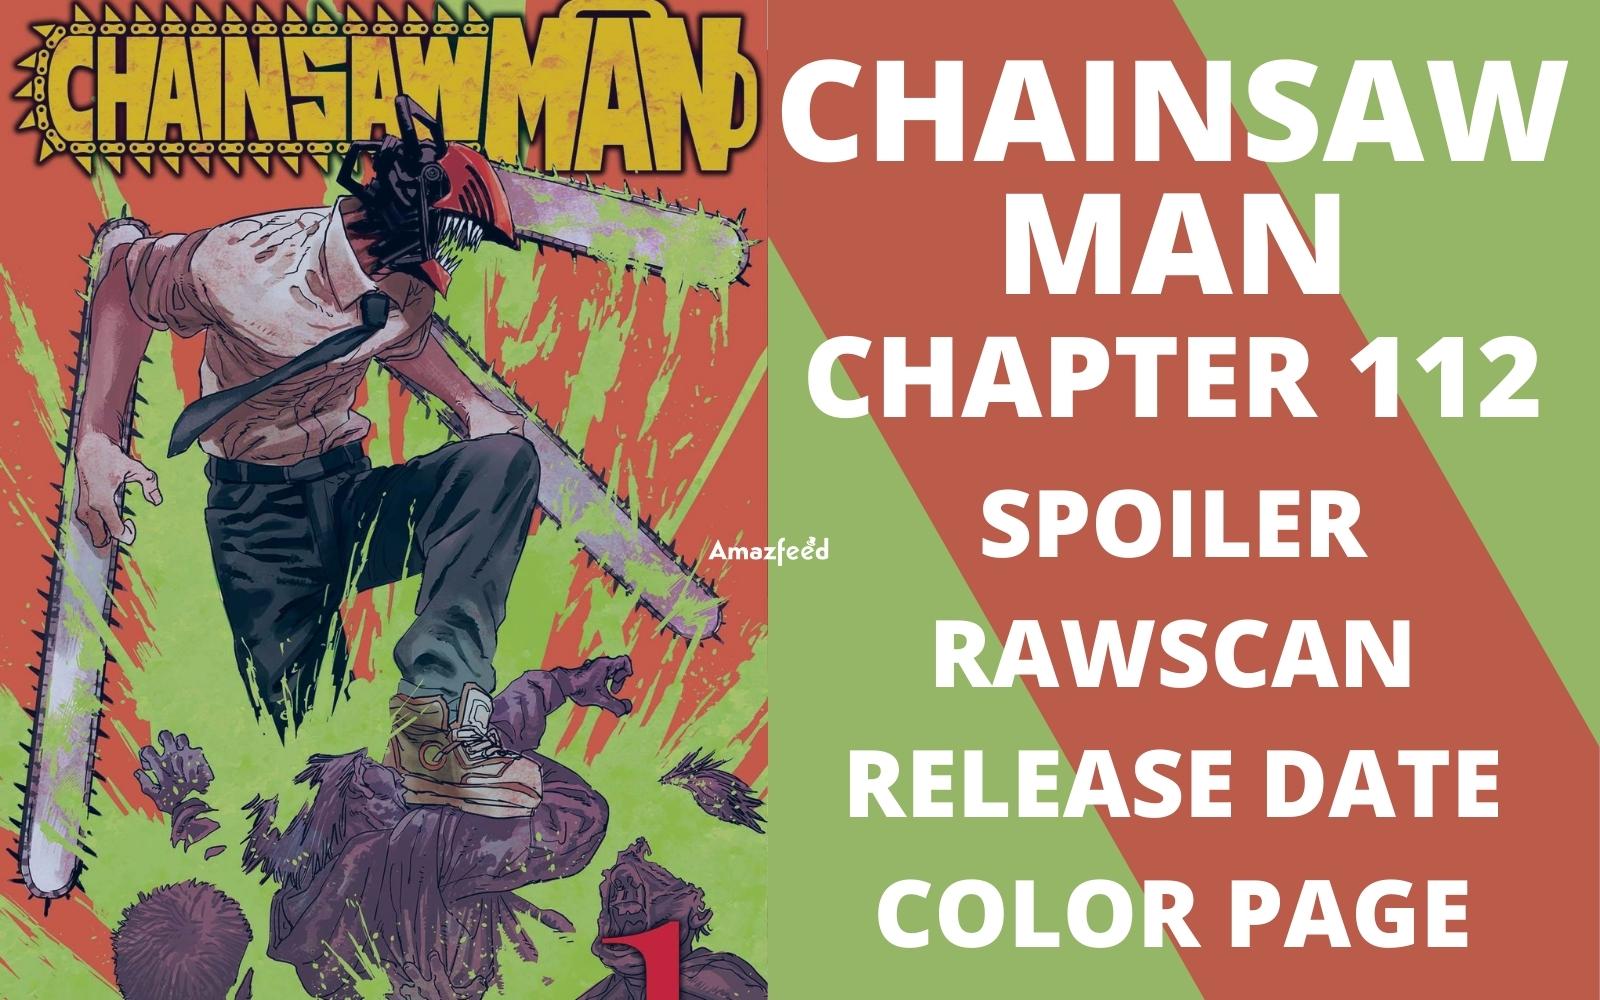 Chainsaw Man Chapter 112 Spoiler, Raw Scan, Release Date, Color Page ...